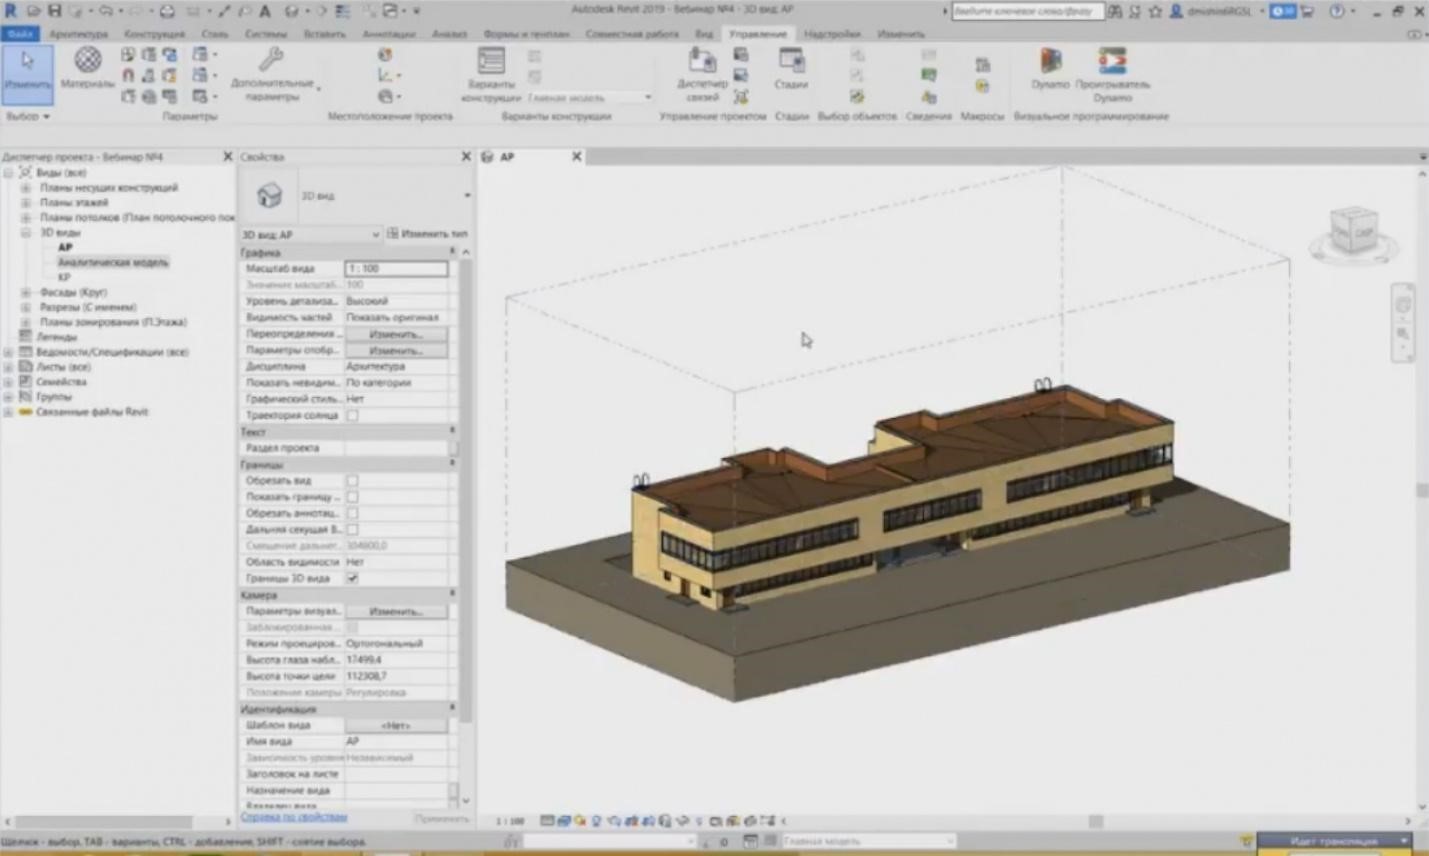 BIM DESIGN IN REVIT. CREATING ARCHITECTURAL AND STRUCTURAL ELEMENTS-1